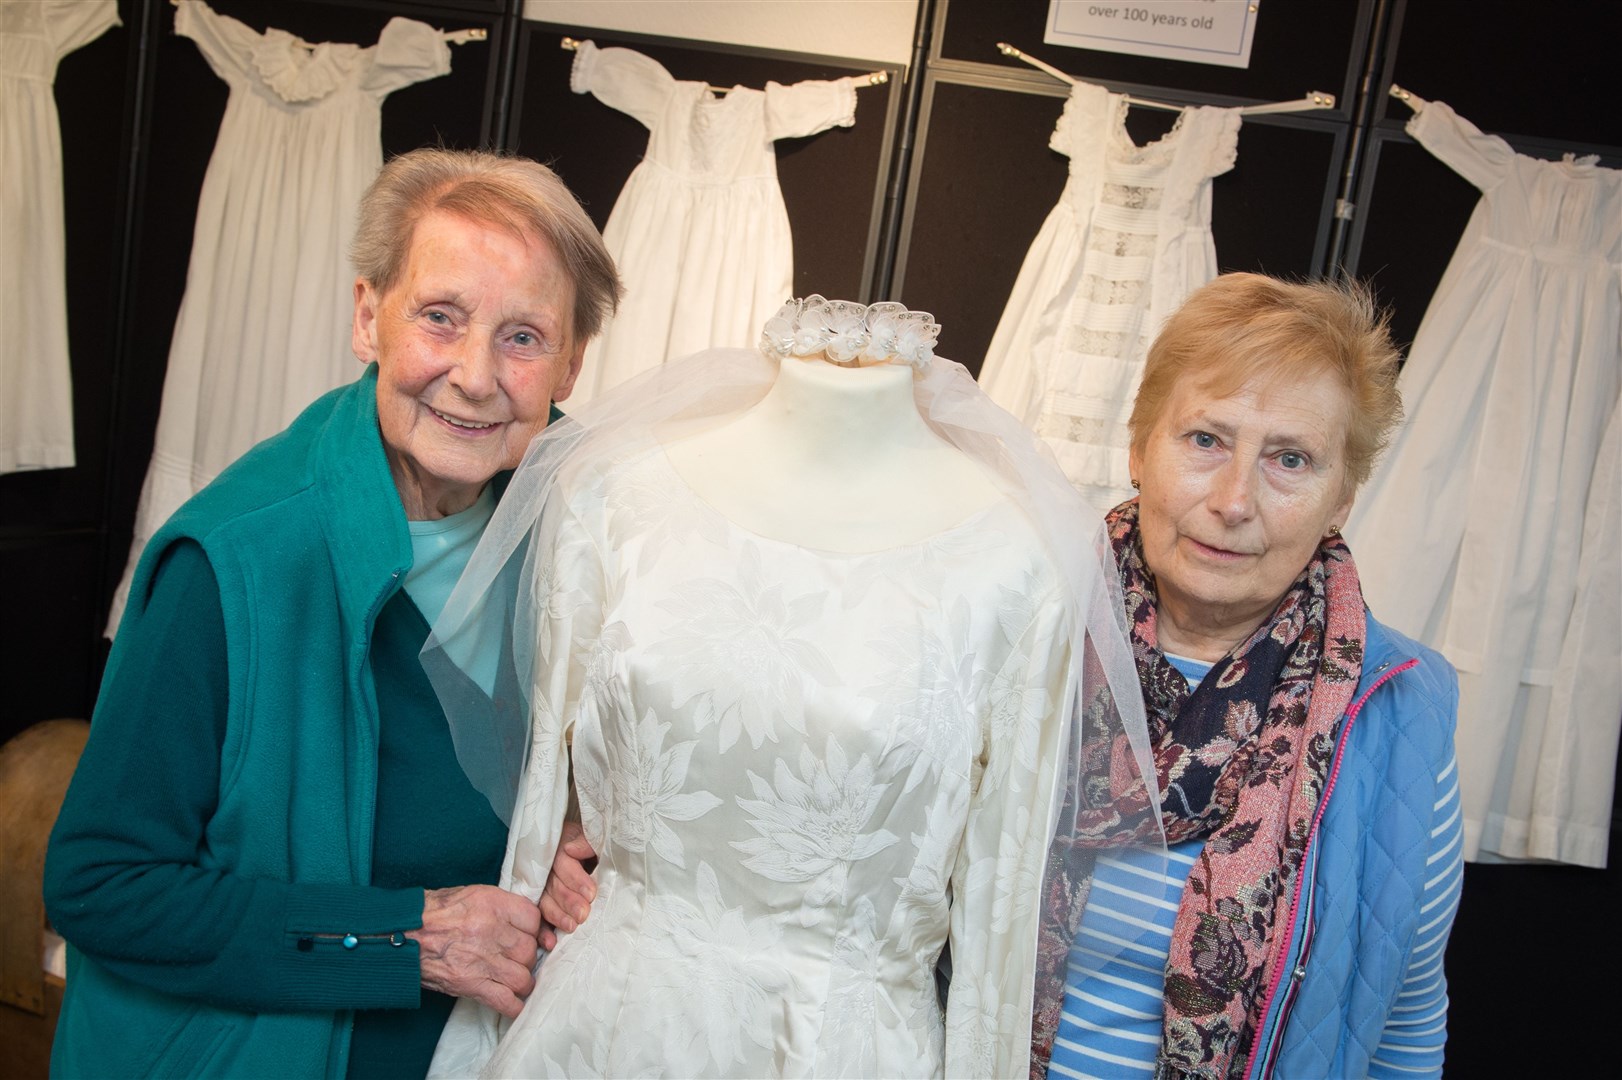 Irene Bell and Shona Gray with a wedding dress from the 1960's with some christening robe's in the backgroundPicture: Callum Mackay. Image No. 033353